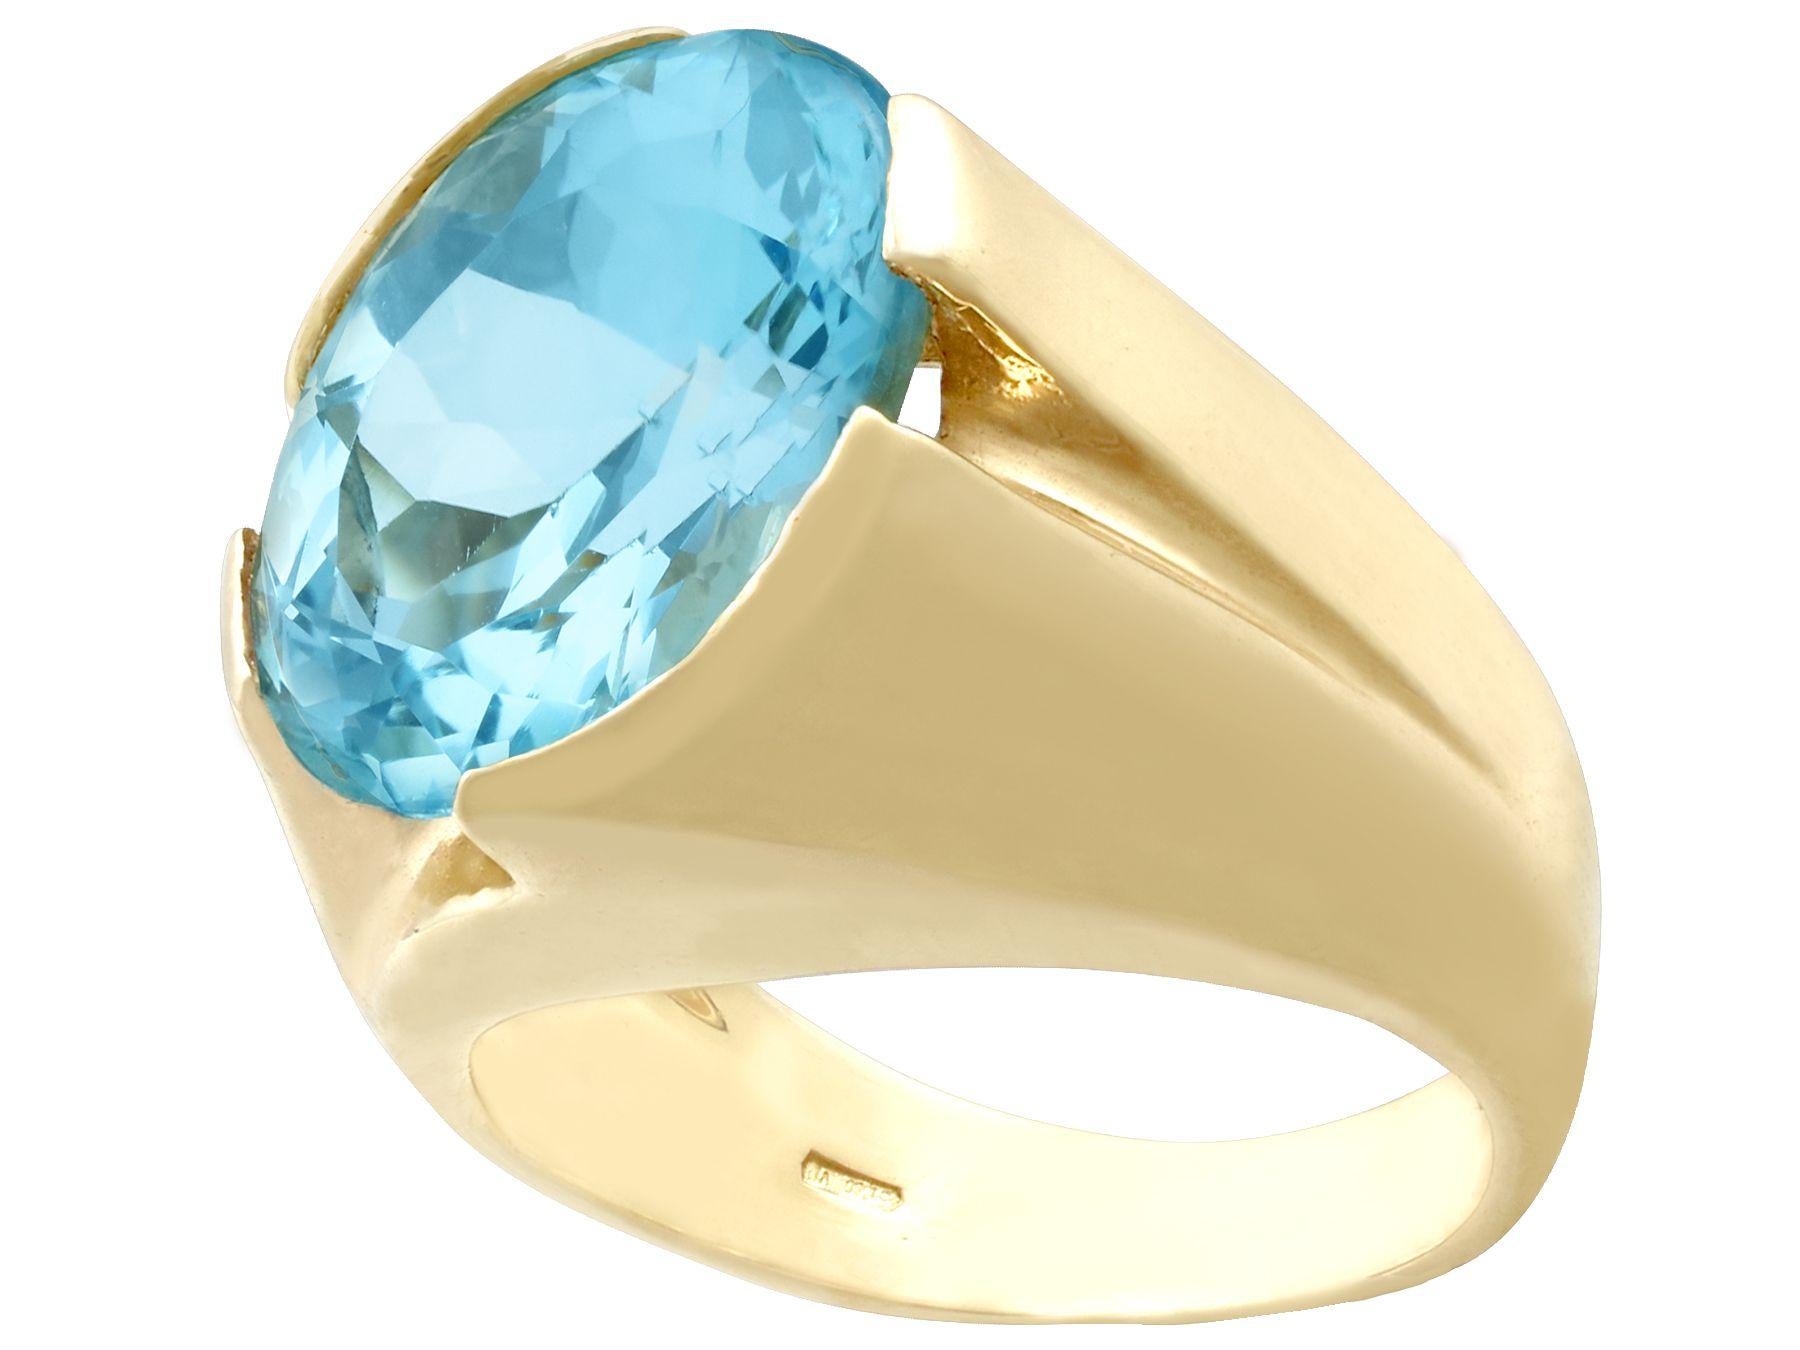 Retro Vintage 1970s 14.12 Carat Oval Cut Topaz Gold Cocktail Ring For Sale